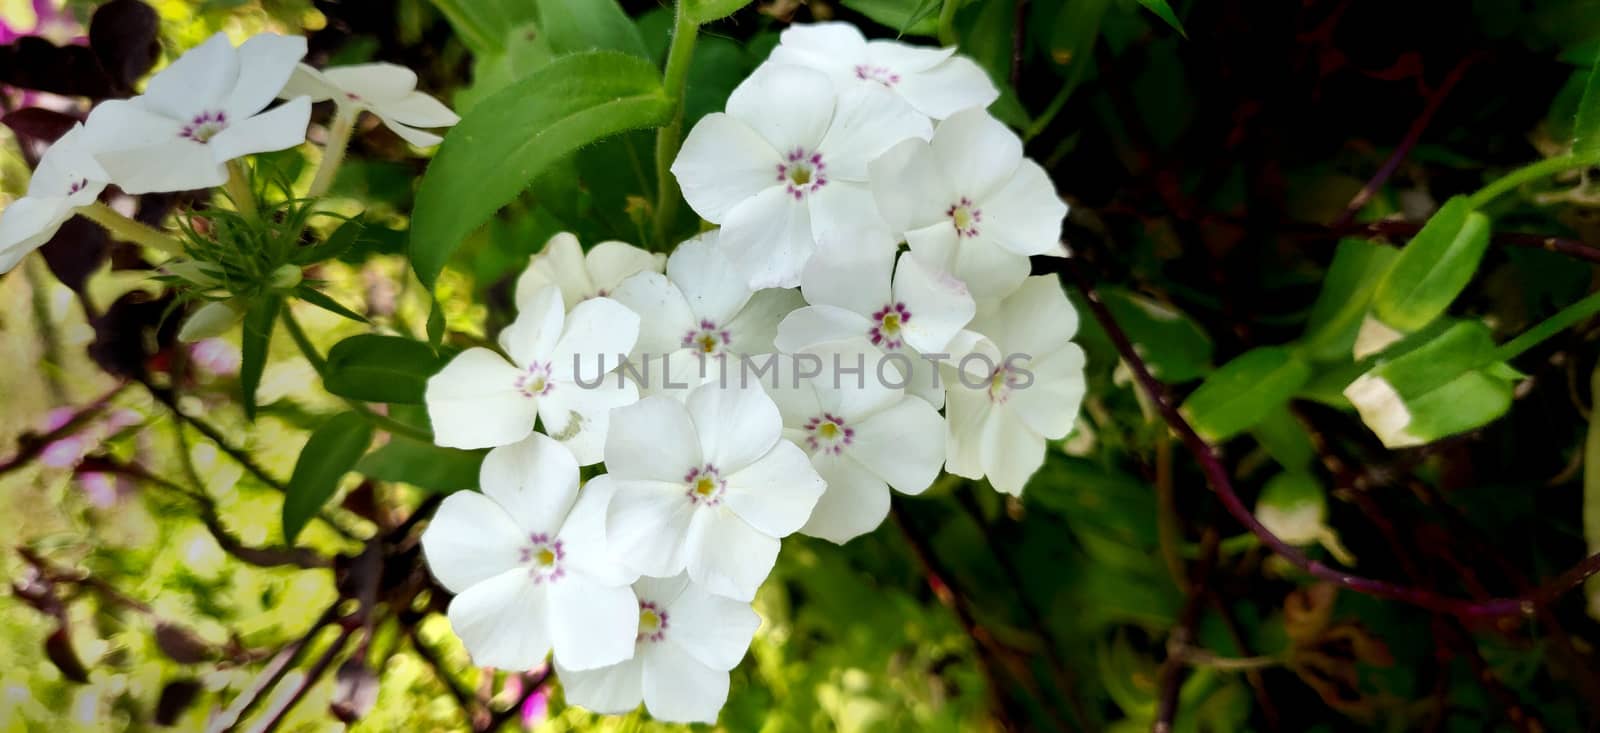 Garden phlox white flower bunch with pink in the center blooming in the India during summers